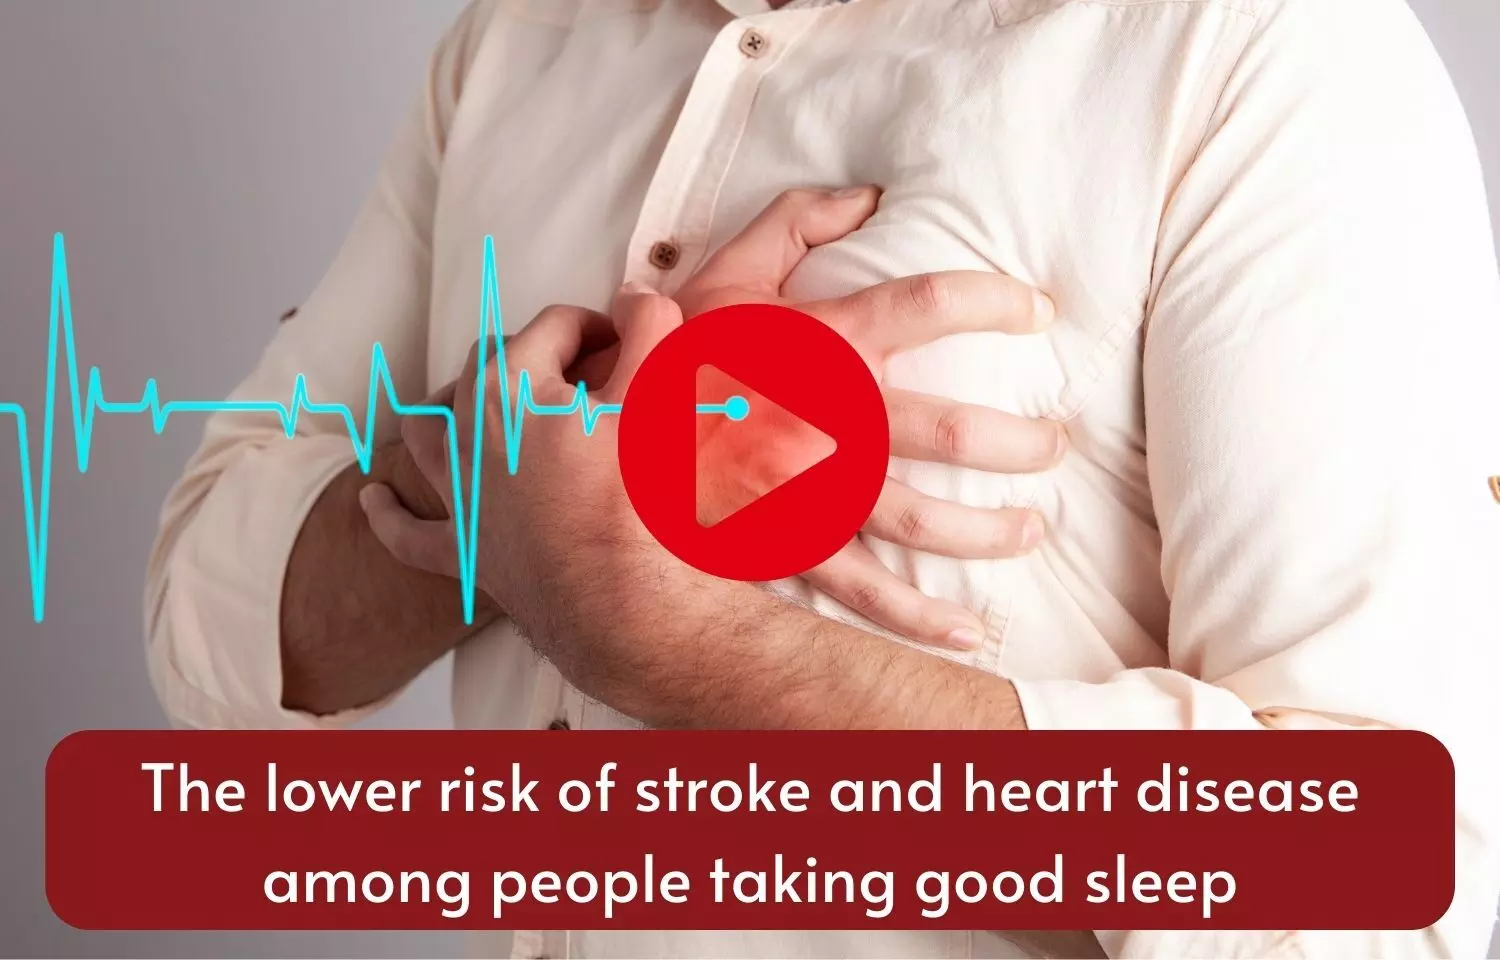 The lower risk of stroke and heart disease among people taking good sleep